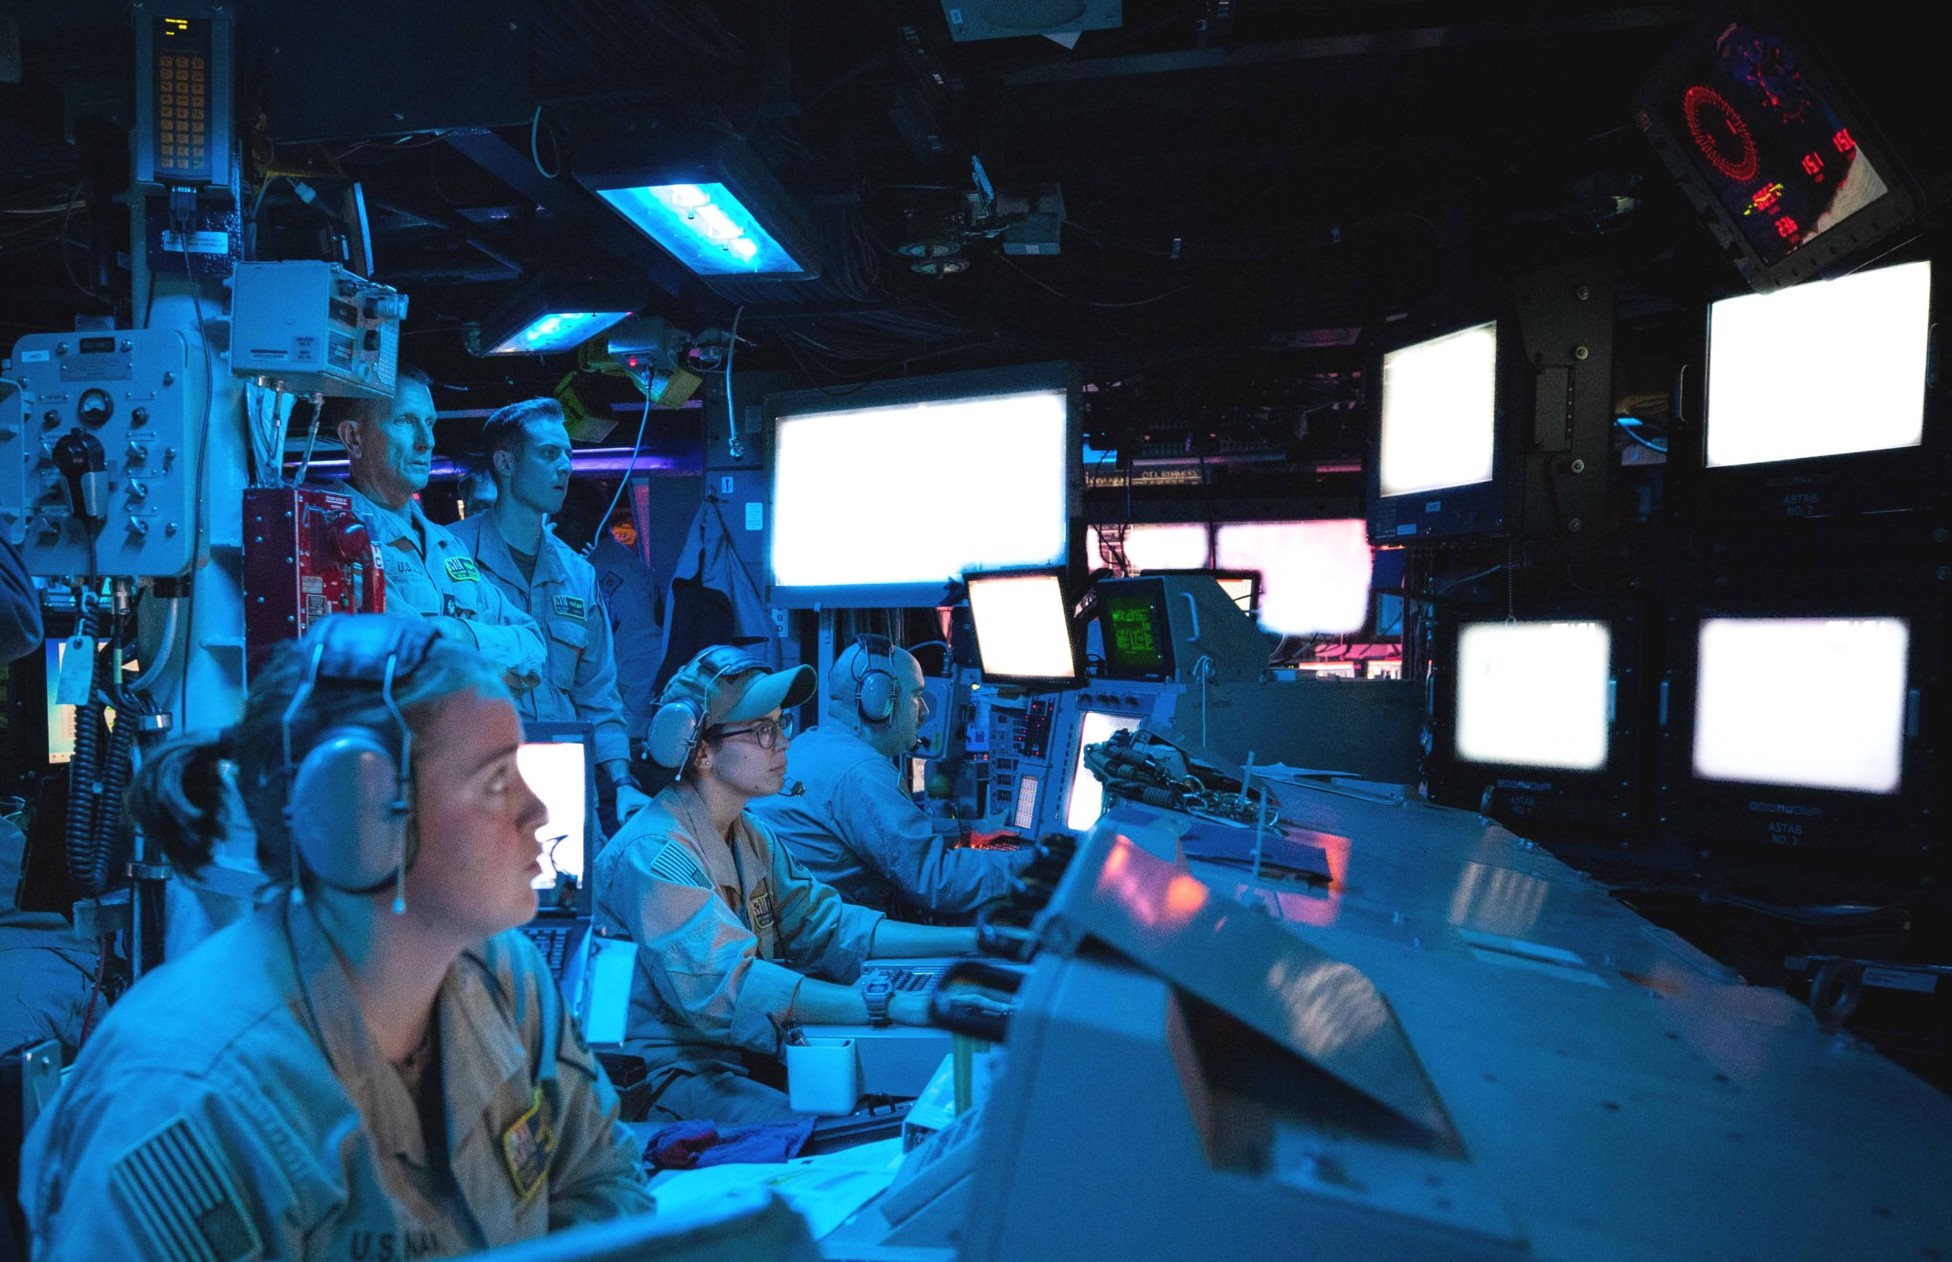 ddg-64 uss carney arleigh burke class guided missile destroyer combat information center cic red sea houthi yemen 136